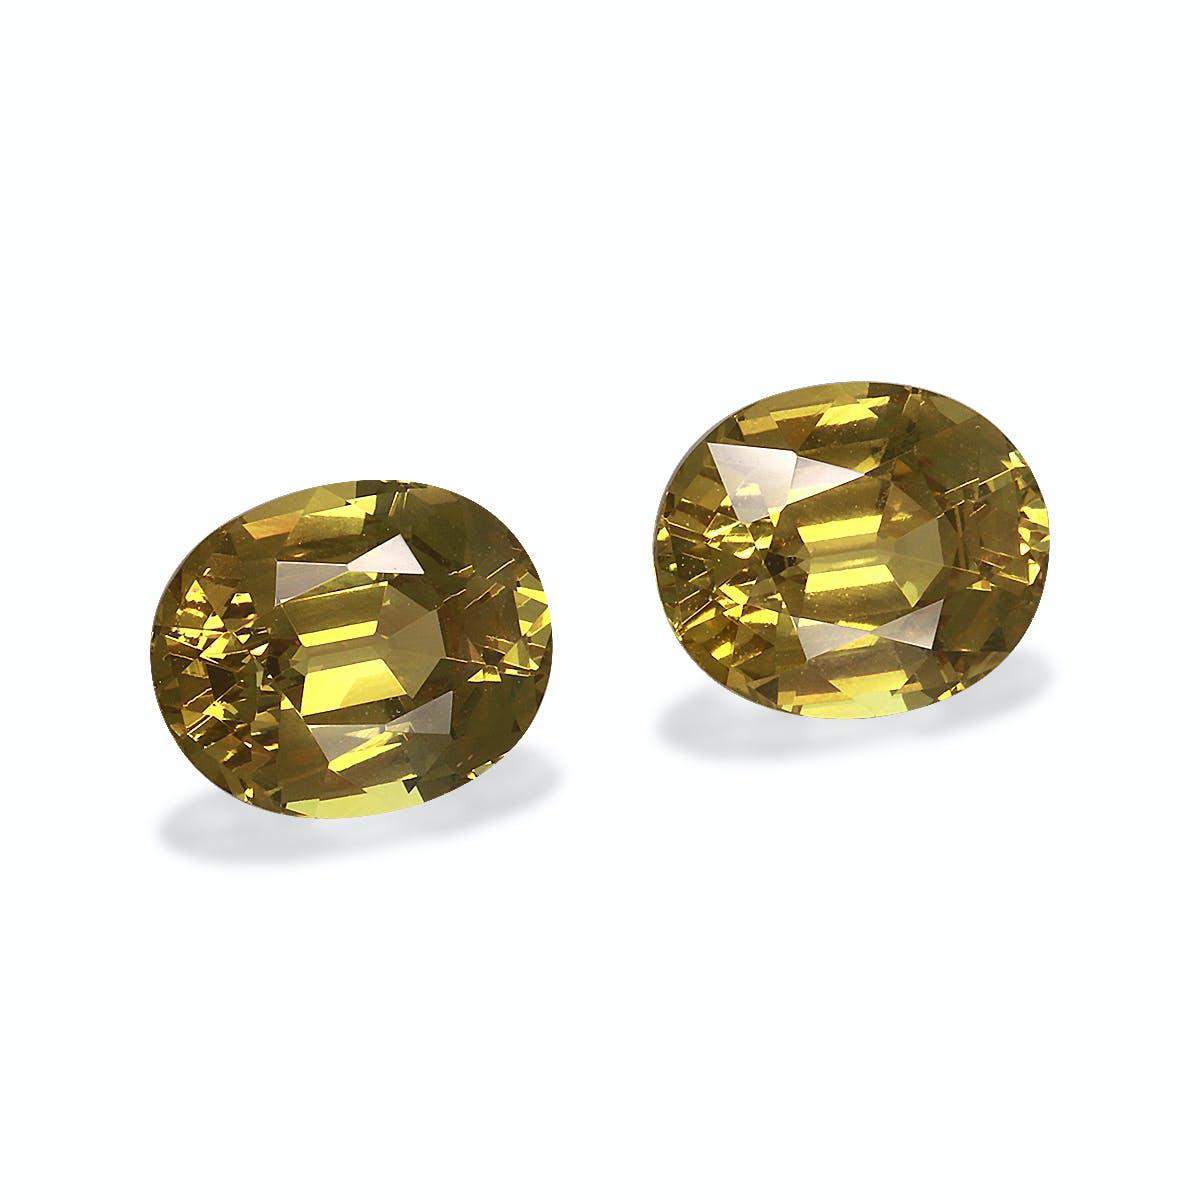 Picture of Lime Green Grossular Garnet 5.68ct - 9x7mm Pair (GG0026)